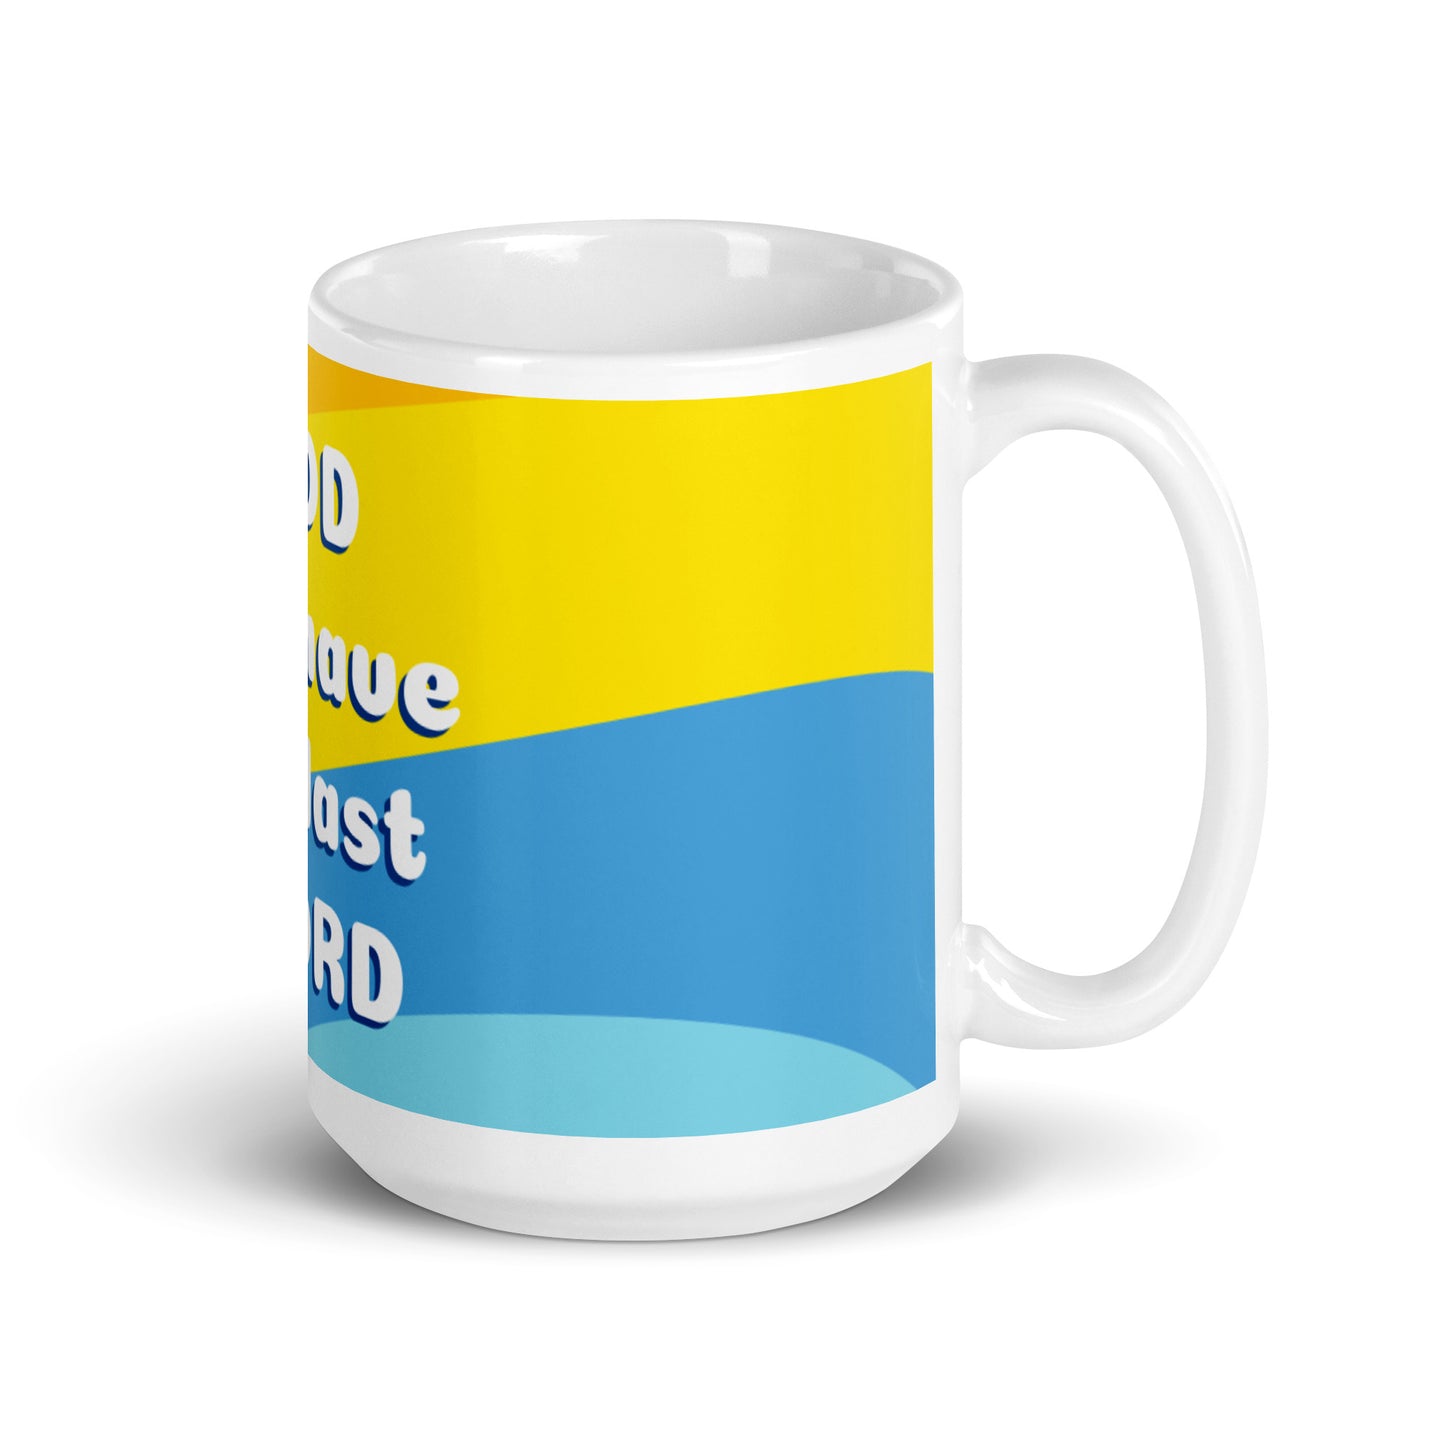 Color Waves White Glossy Mug - God will have the last word